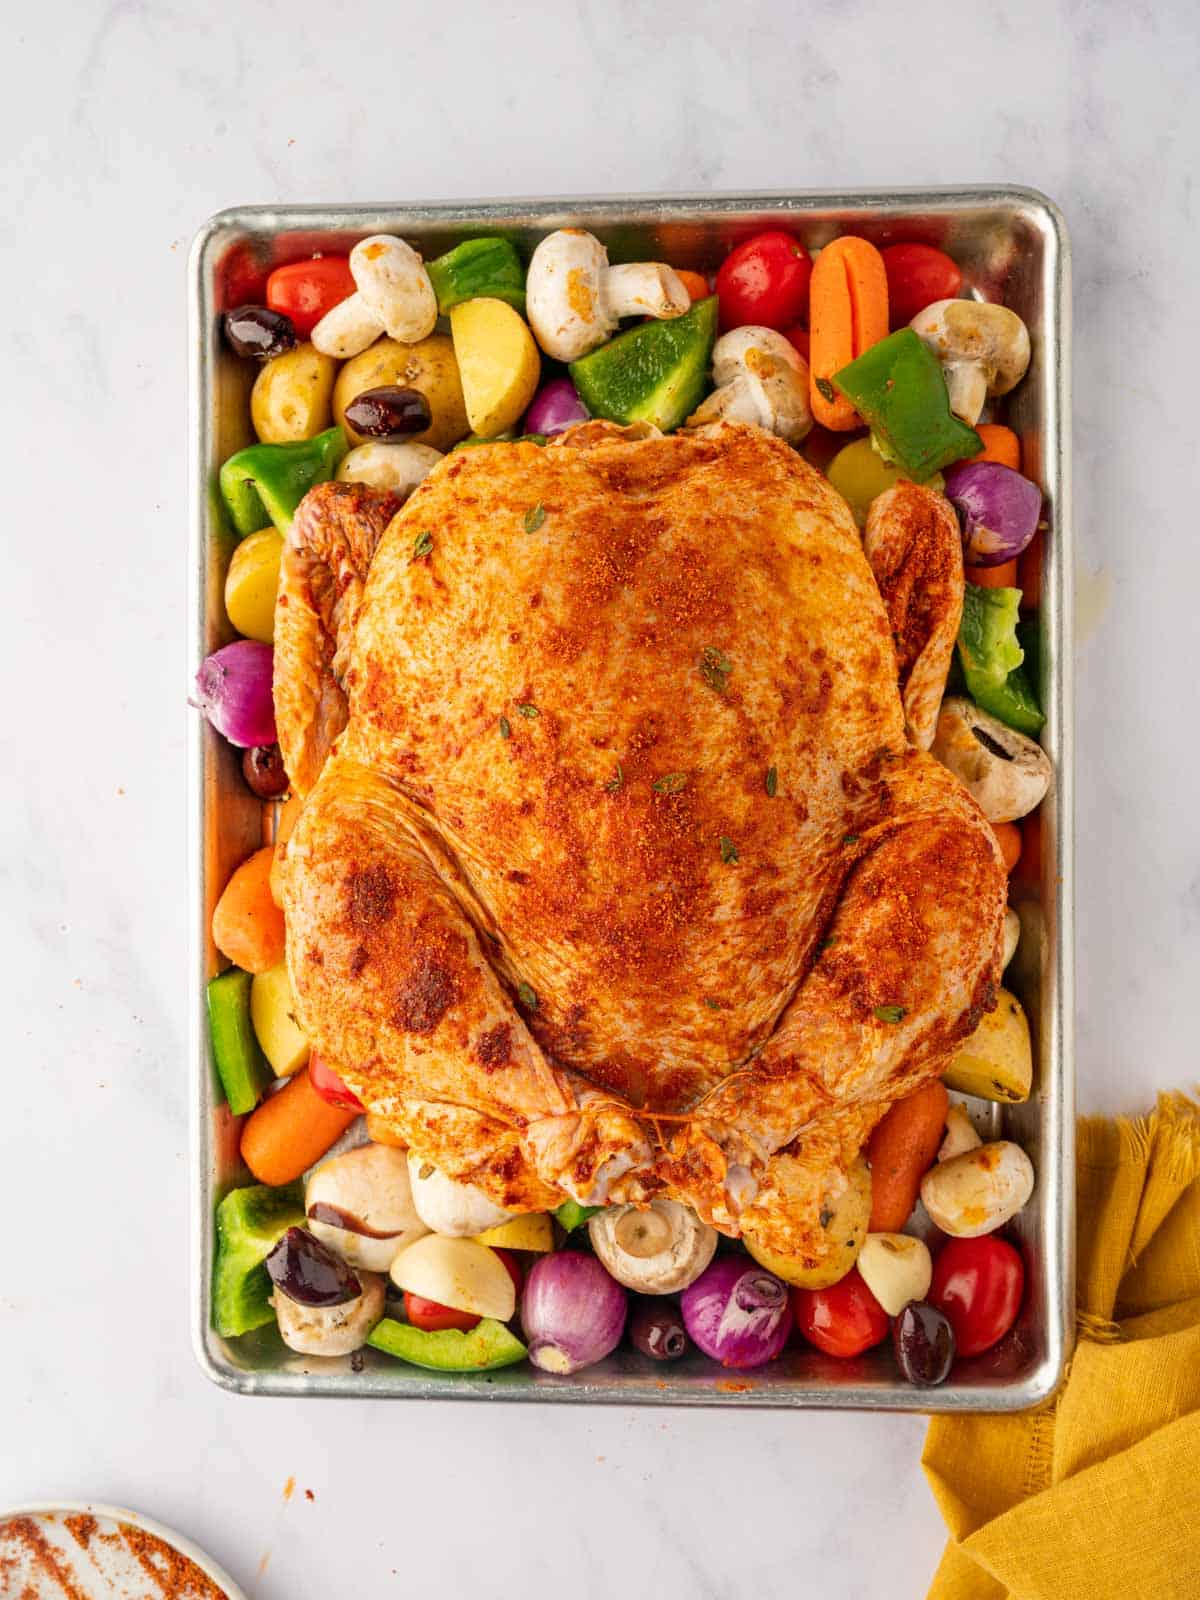 Seasoned whole chicken on a baking sheet with vegetables.